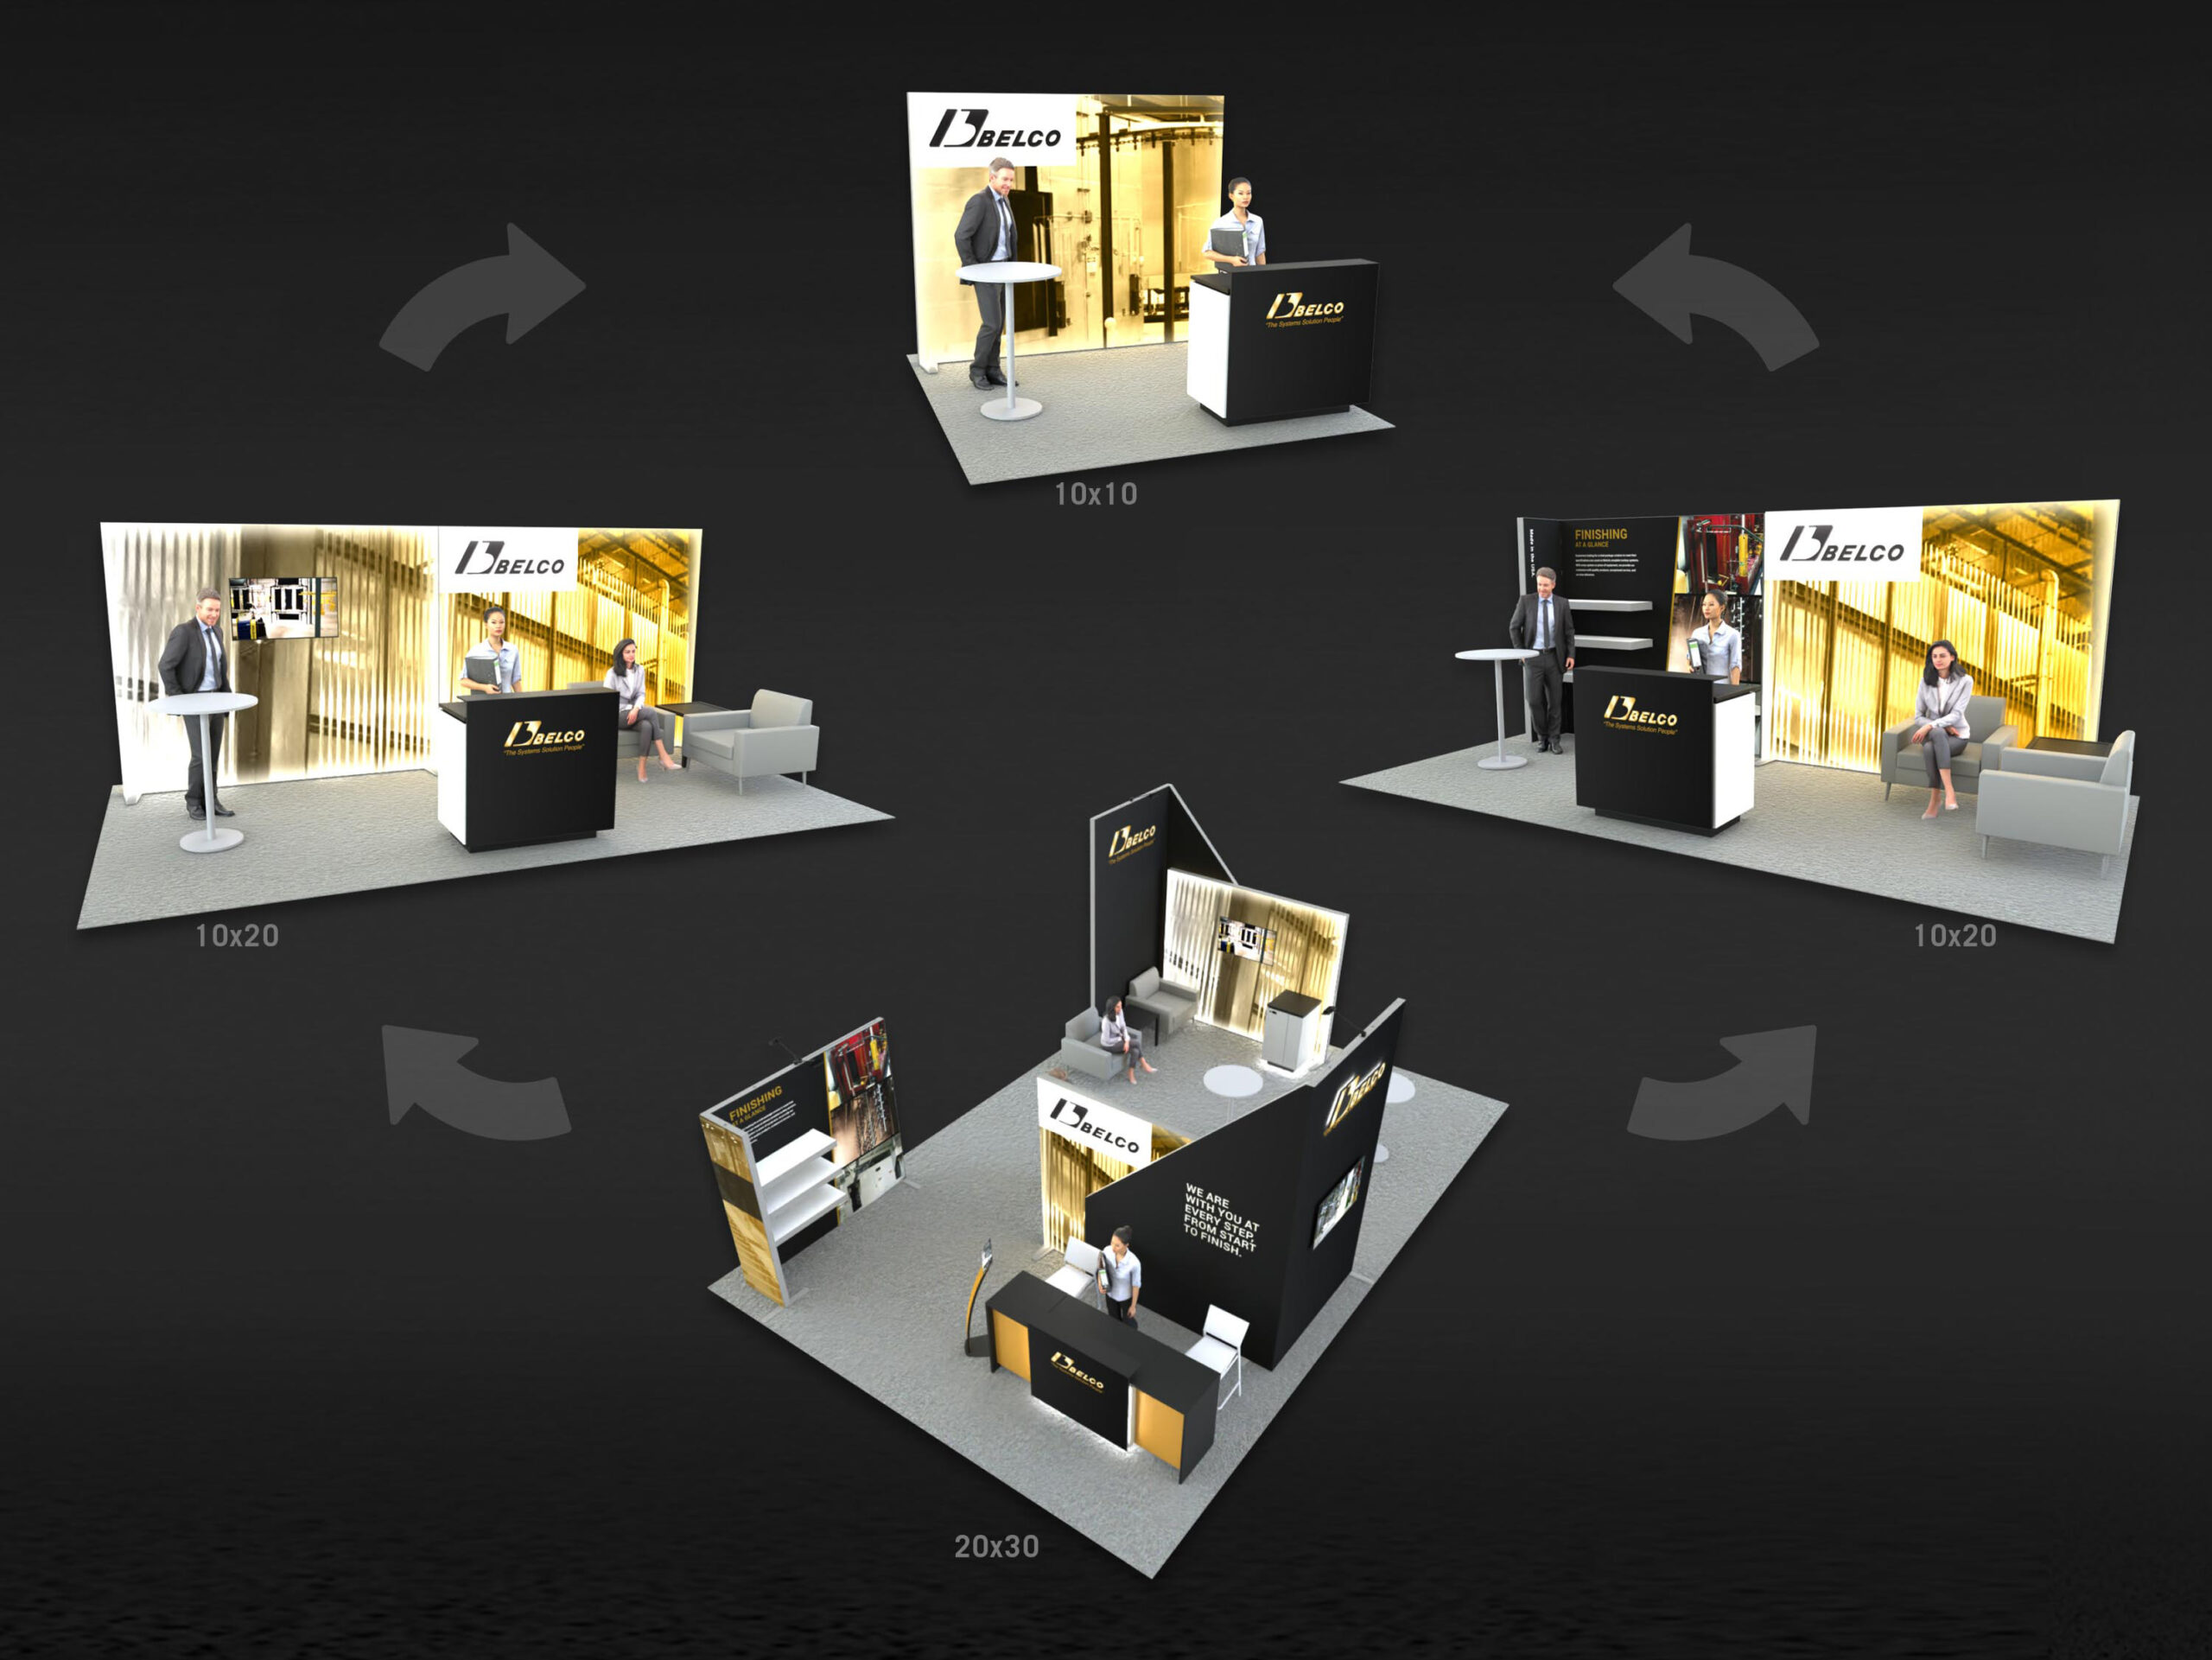 4 renders of trade show booth examples with arrows in between